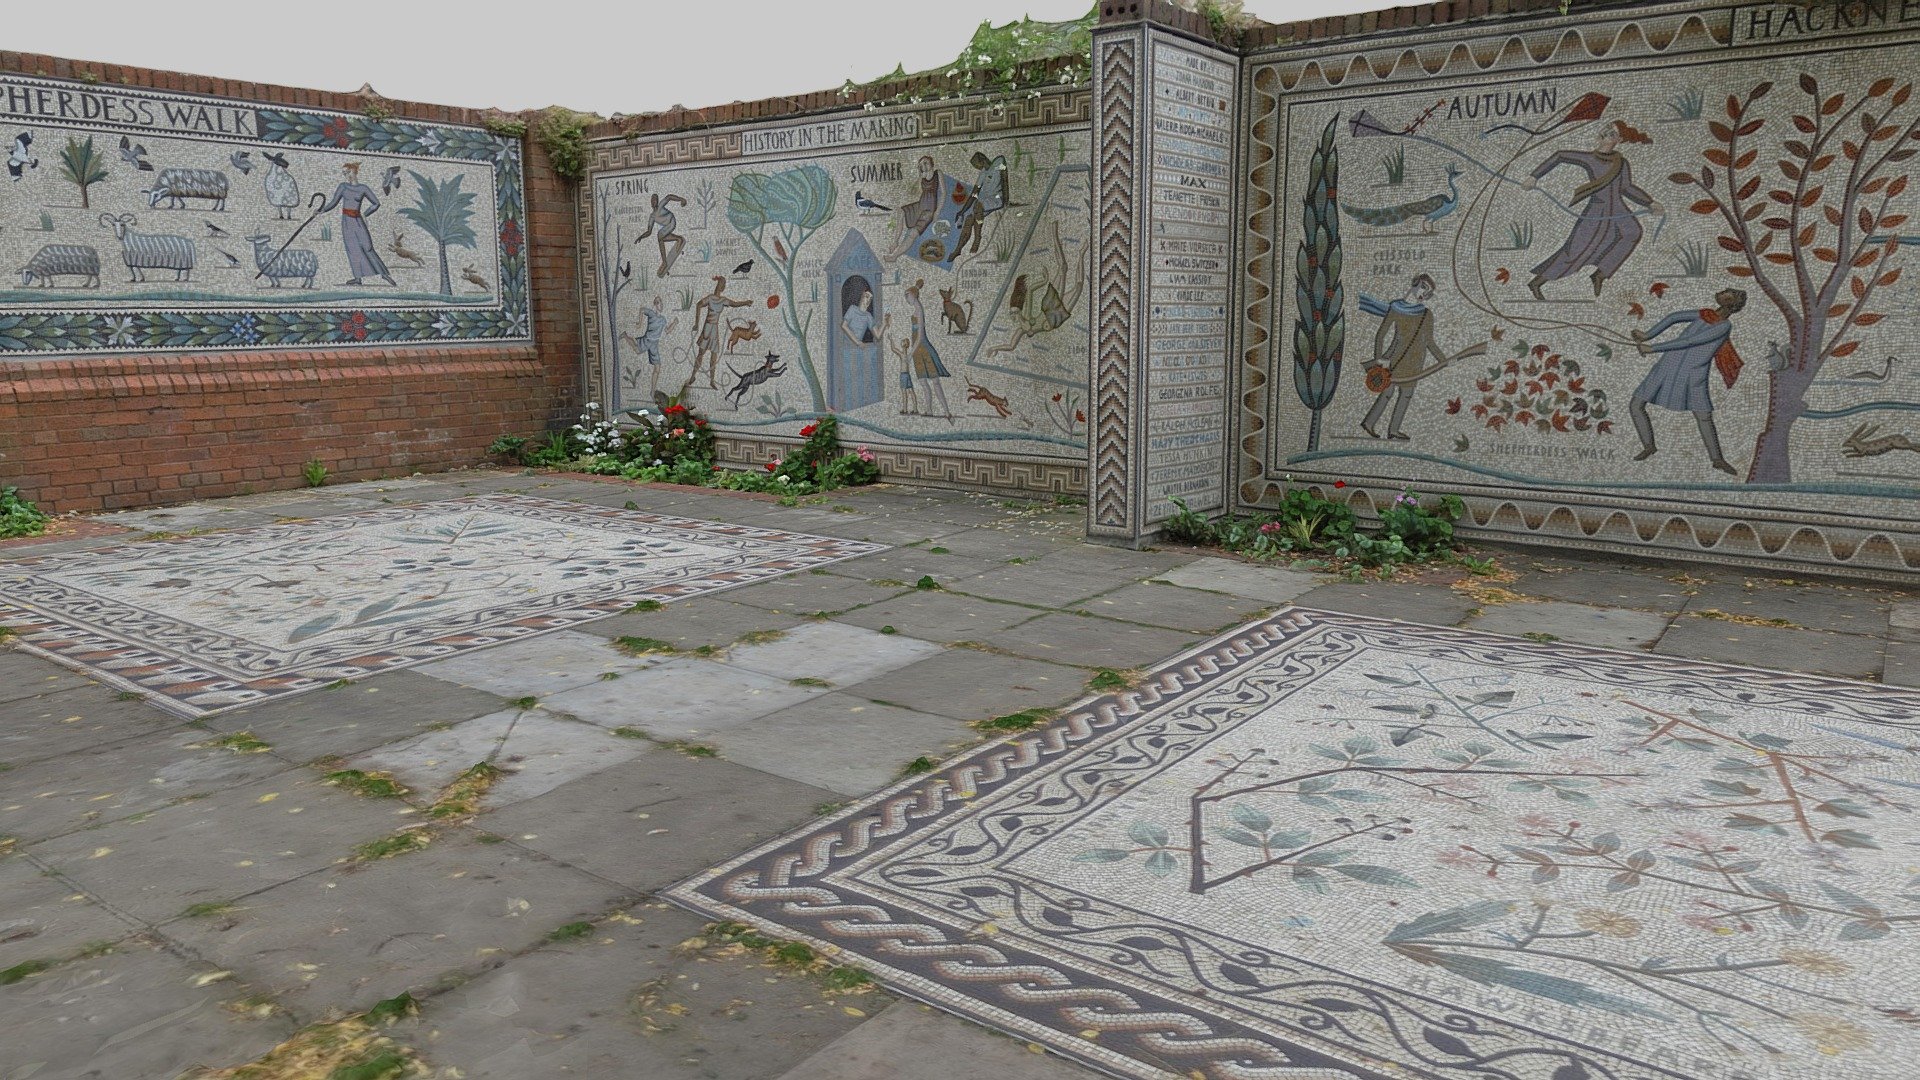 A set of mosaics in the north east corner of Shepherdess Walk Park, Hackney, London.

The mosaics are inspired by Roman mosaics and show scenes of contemporary life in Hackney.

Date: 2013. Designed by Tessa Hunkin.

https://hackney.gov.uk/shepherdess-walk

934 photos taken in June 2021 with a Sony a6000 and processed in Reality Capture 3d model